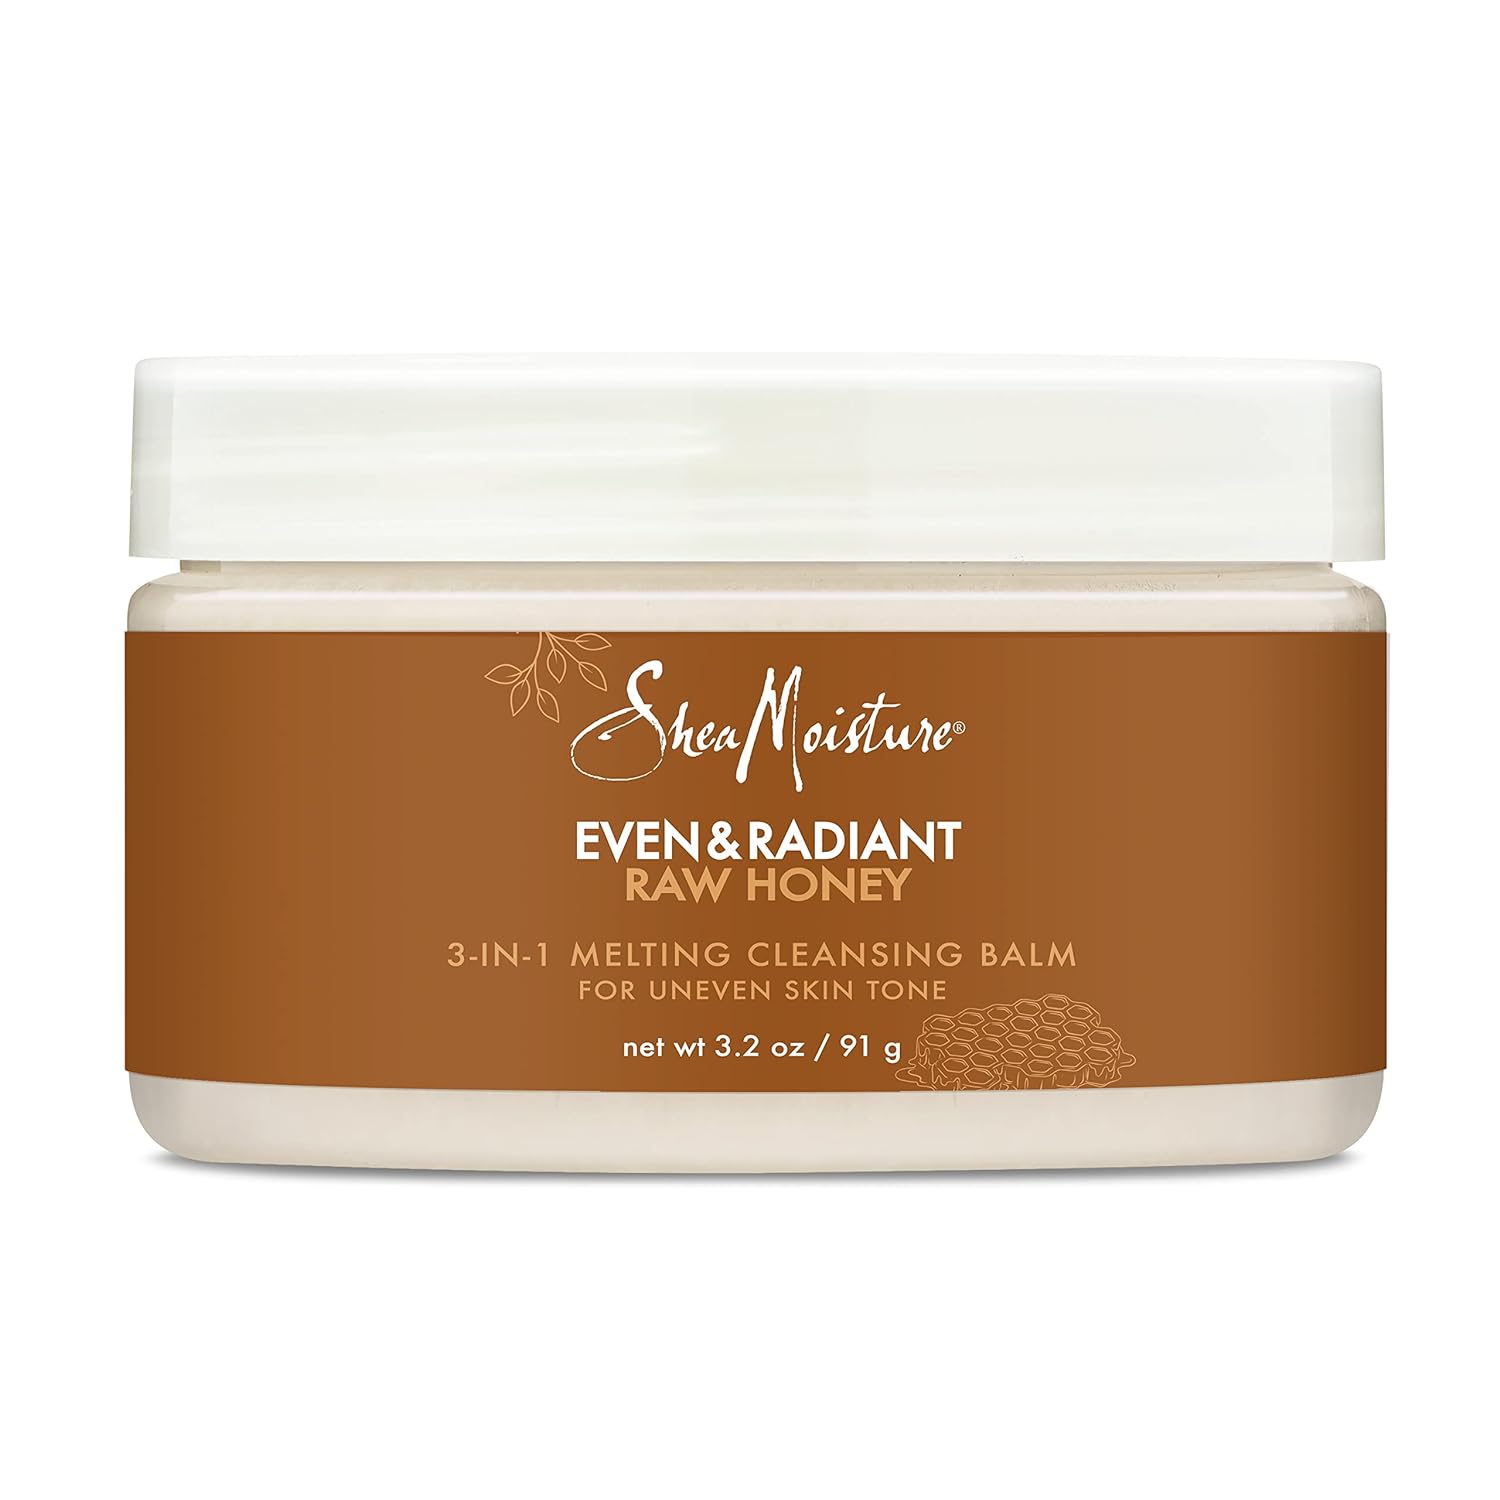 SheaMoisture Even and Radiant Face Cleanser For Uneven Skin Tone and Dark Spots 3-in-1 Cleansing Balm With Raw Honey 3.2 oz